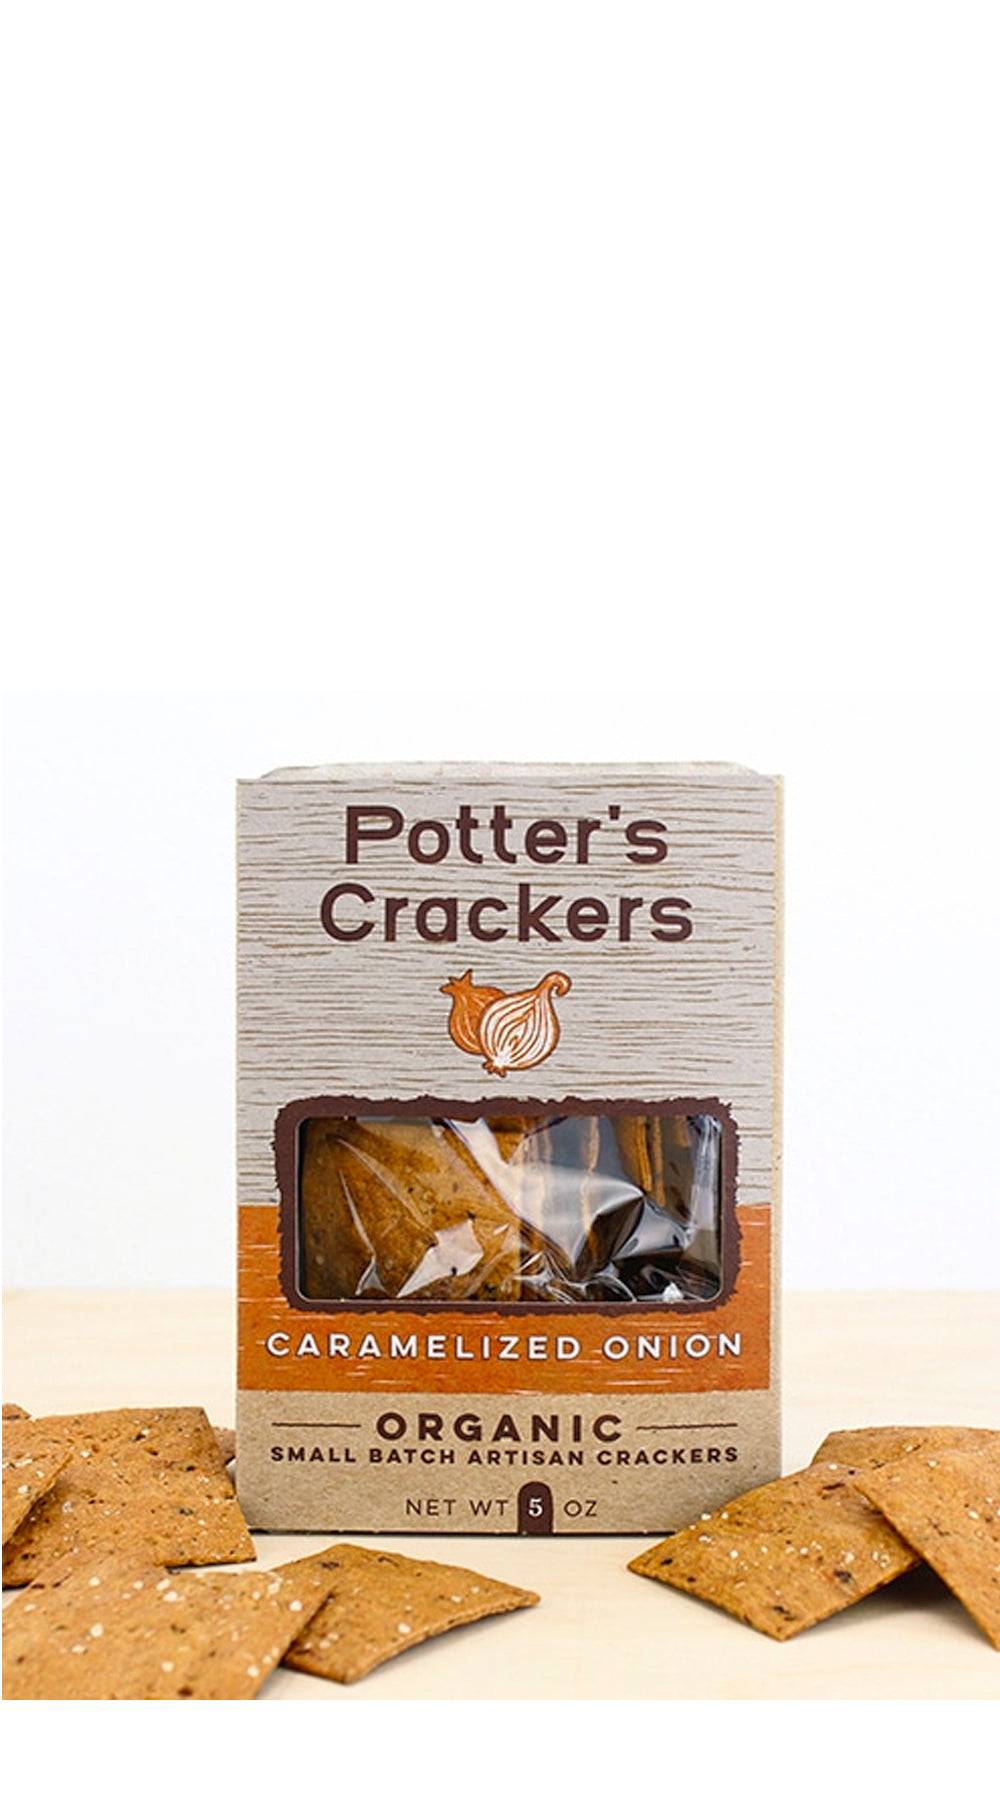 Potter's Crackers Caramelized Onion